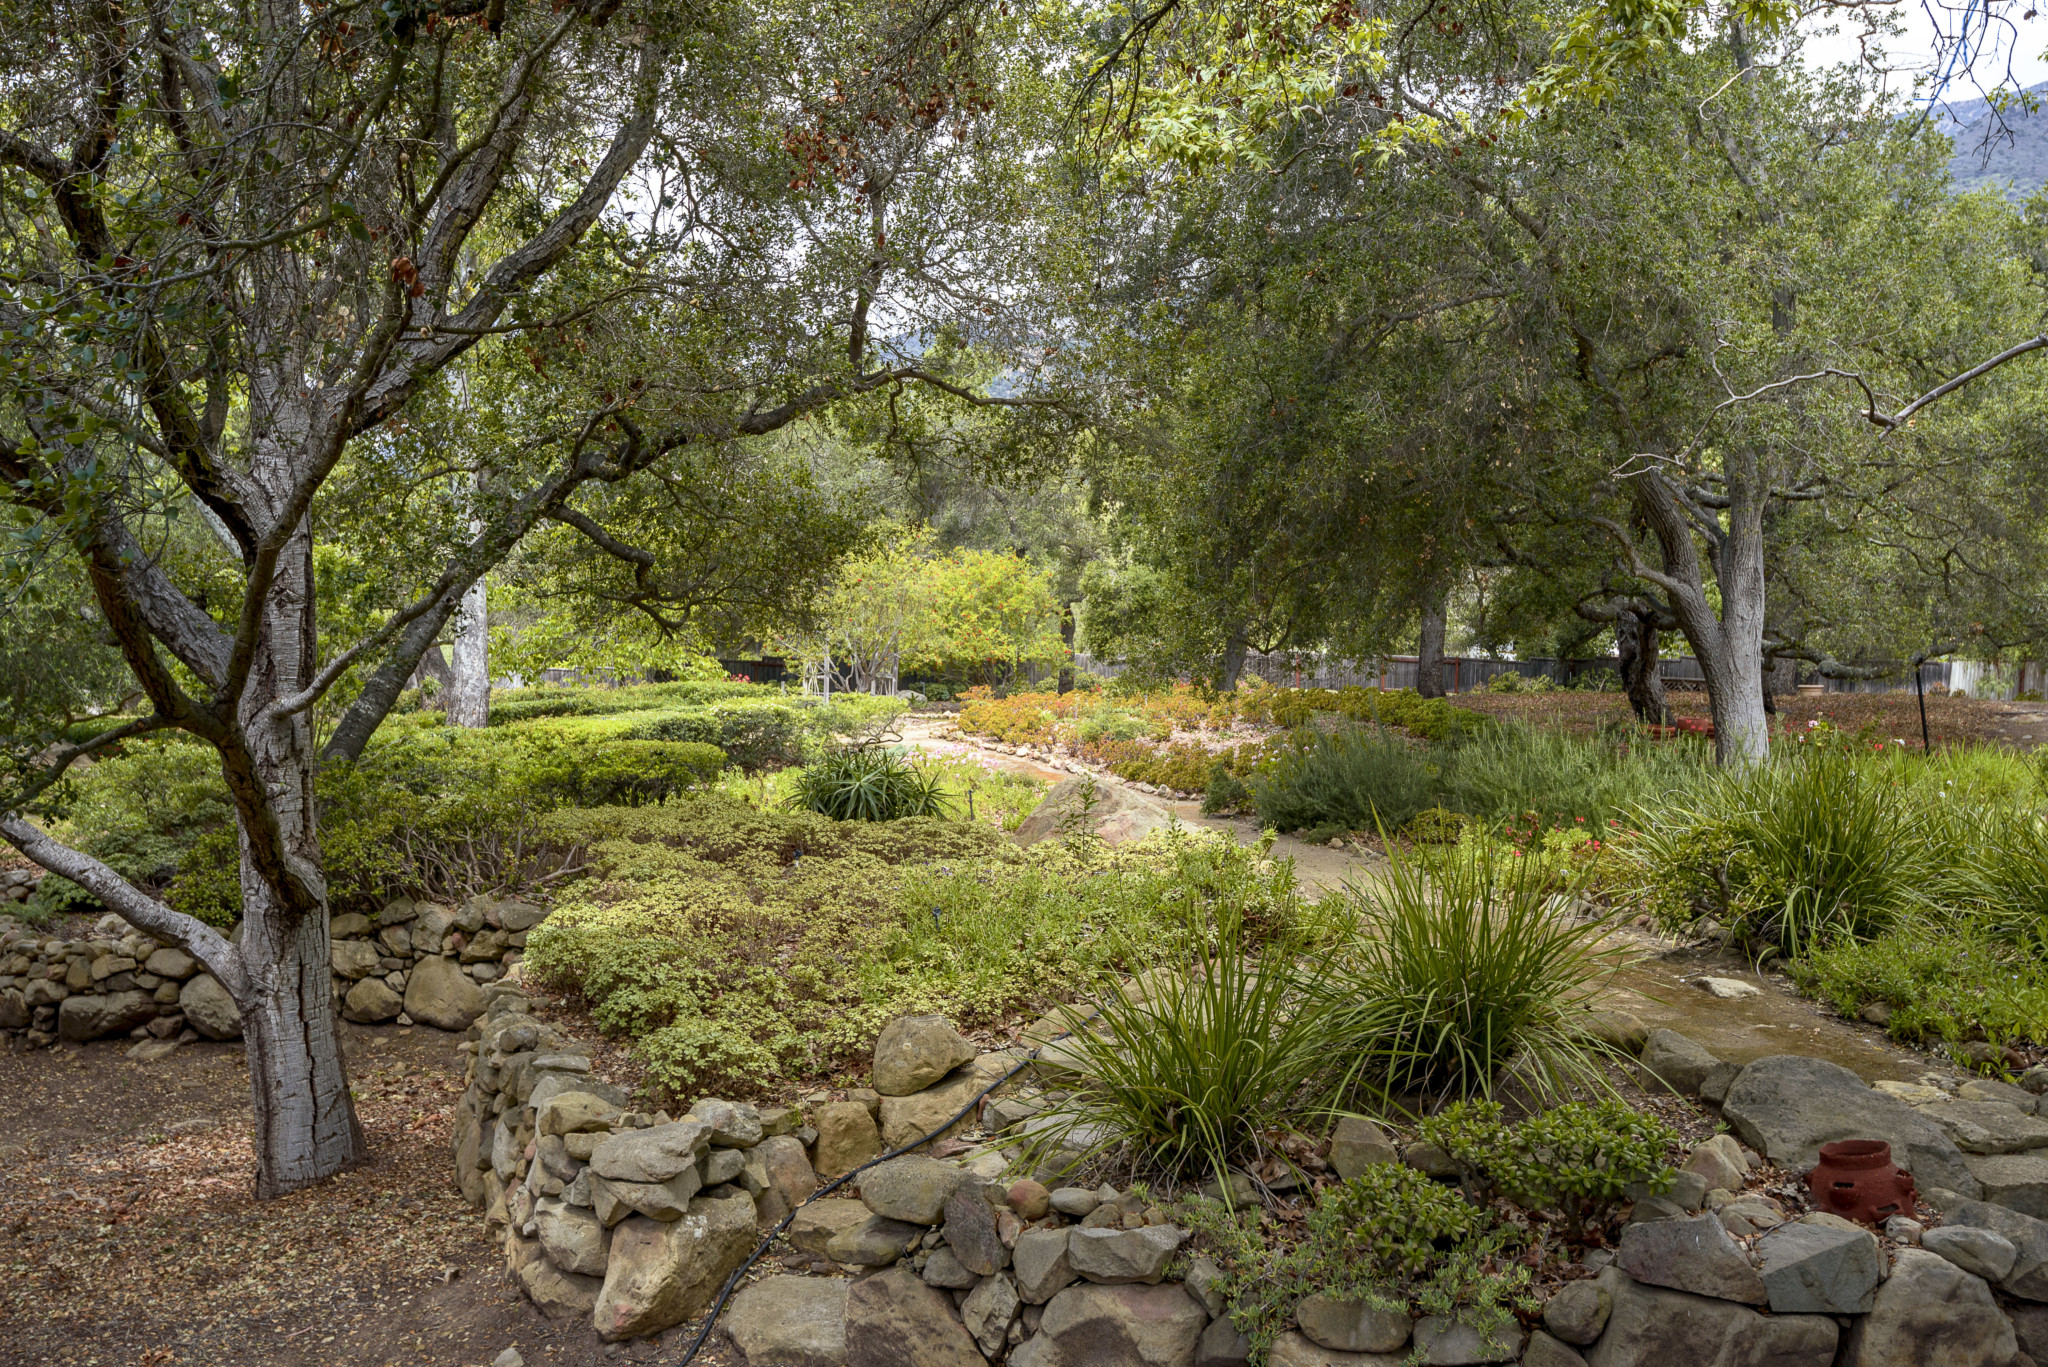 Idyllic wonderland with meandering walking trails and gardens